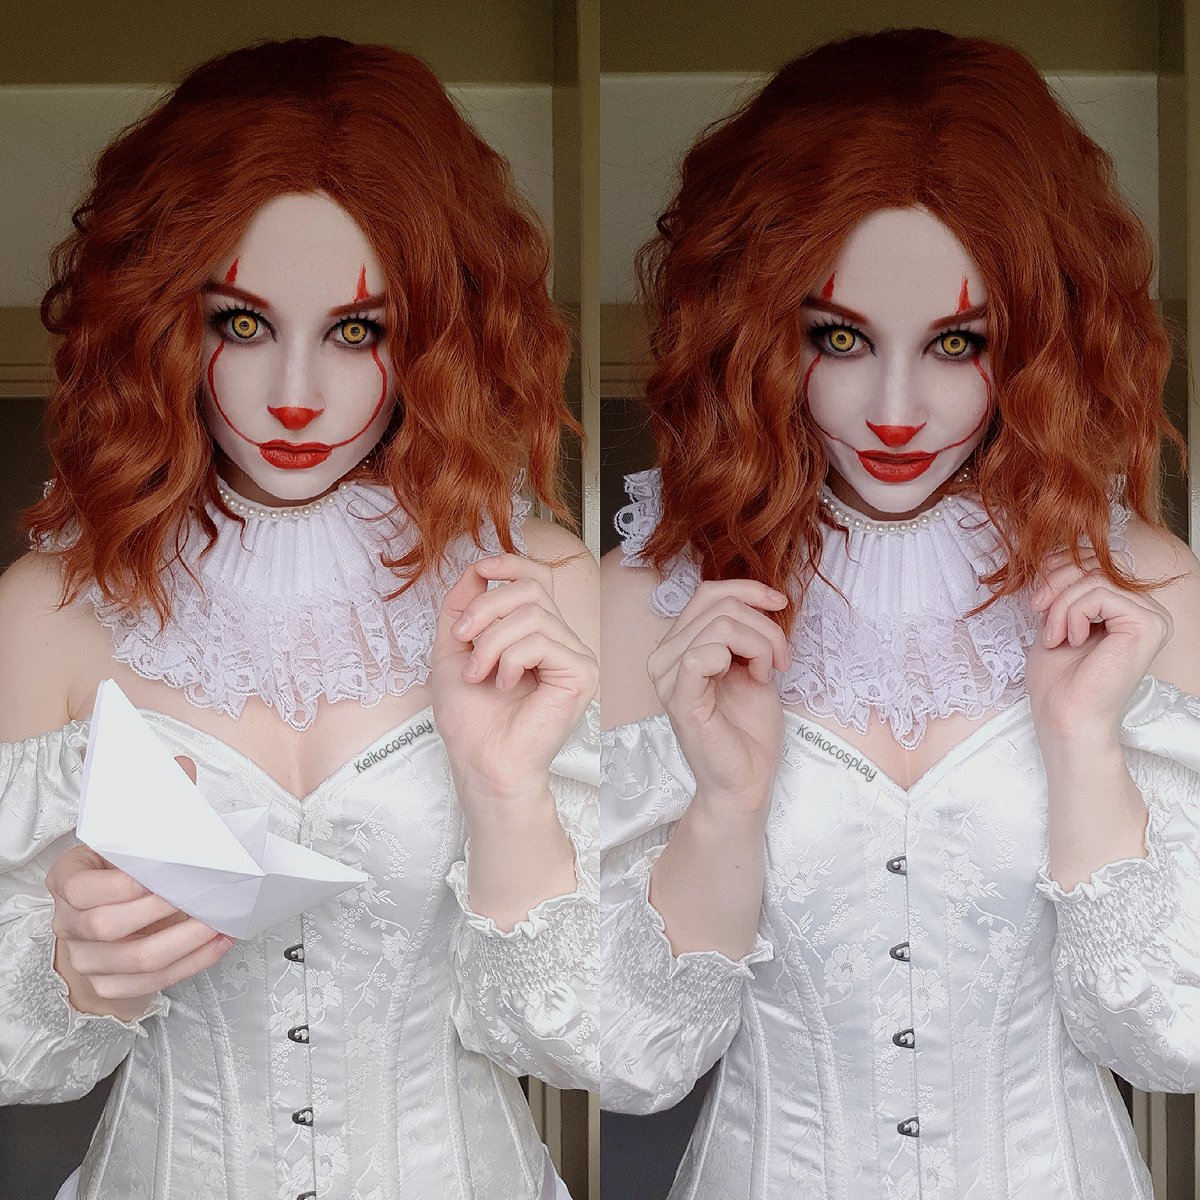 Happy #halloween everyone 💕😍 #pennywise will come from underneath your bed #it #pennywisecosplay #ITMovie #halloween2019 #cosplay #halloweencosplay #cosplaybuzz #uniqso #makeup #halloweenmakeup #itchapter2